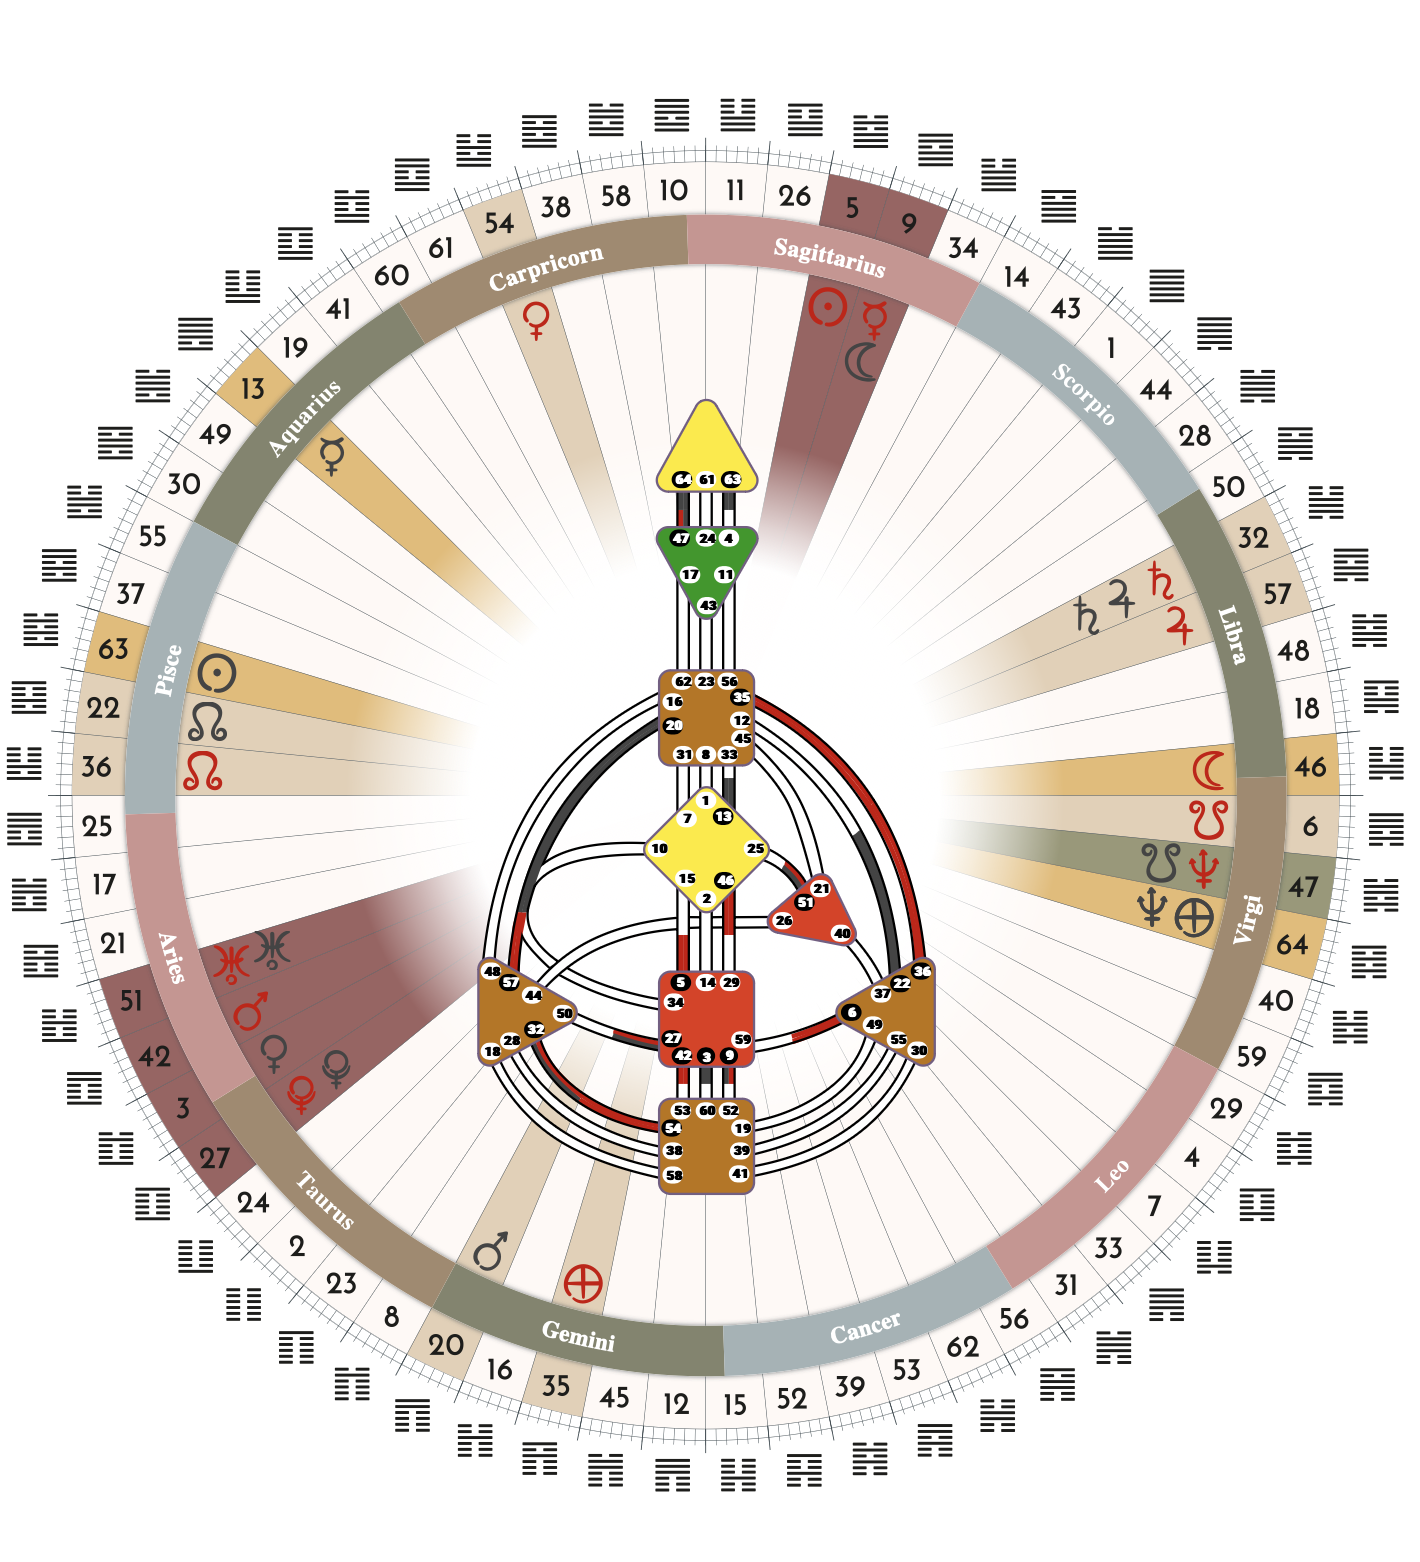 A circular chart with symbols and numbers

Description automatically generated with medium confidence